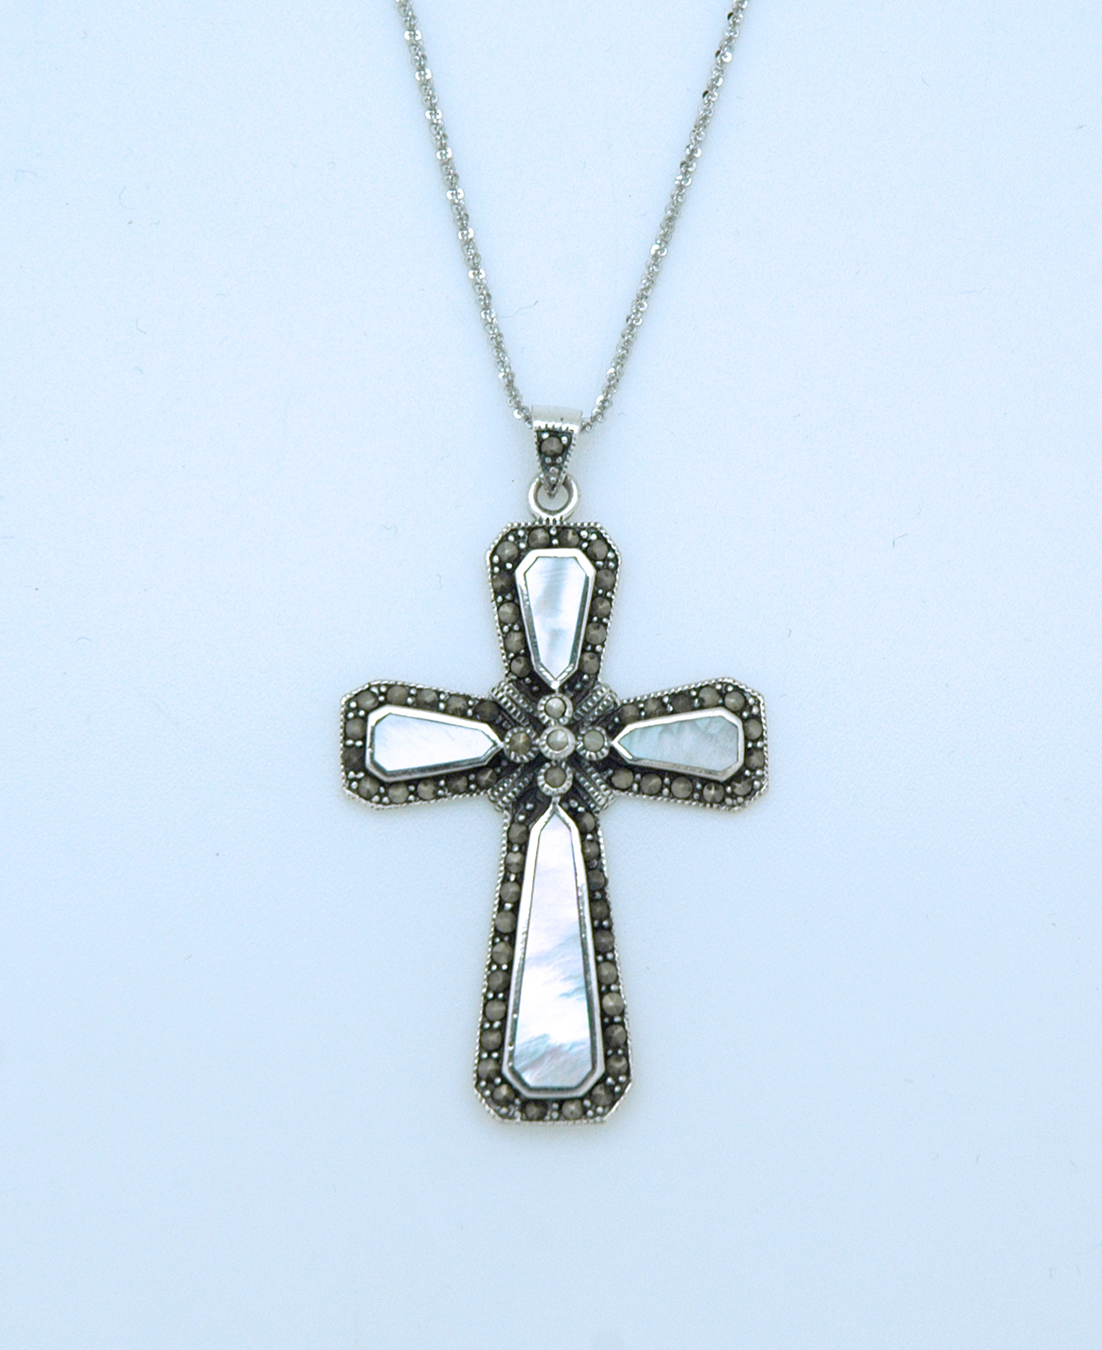 SSN33 - Sterling Silver Necklace, Mother of Pearl Cross, 18 in. Sterling Silver Chain